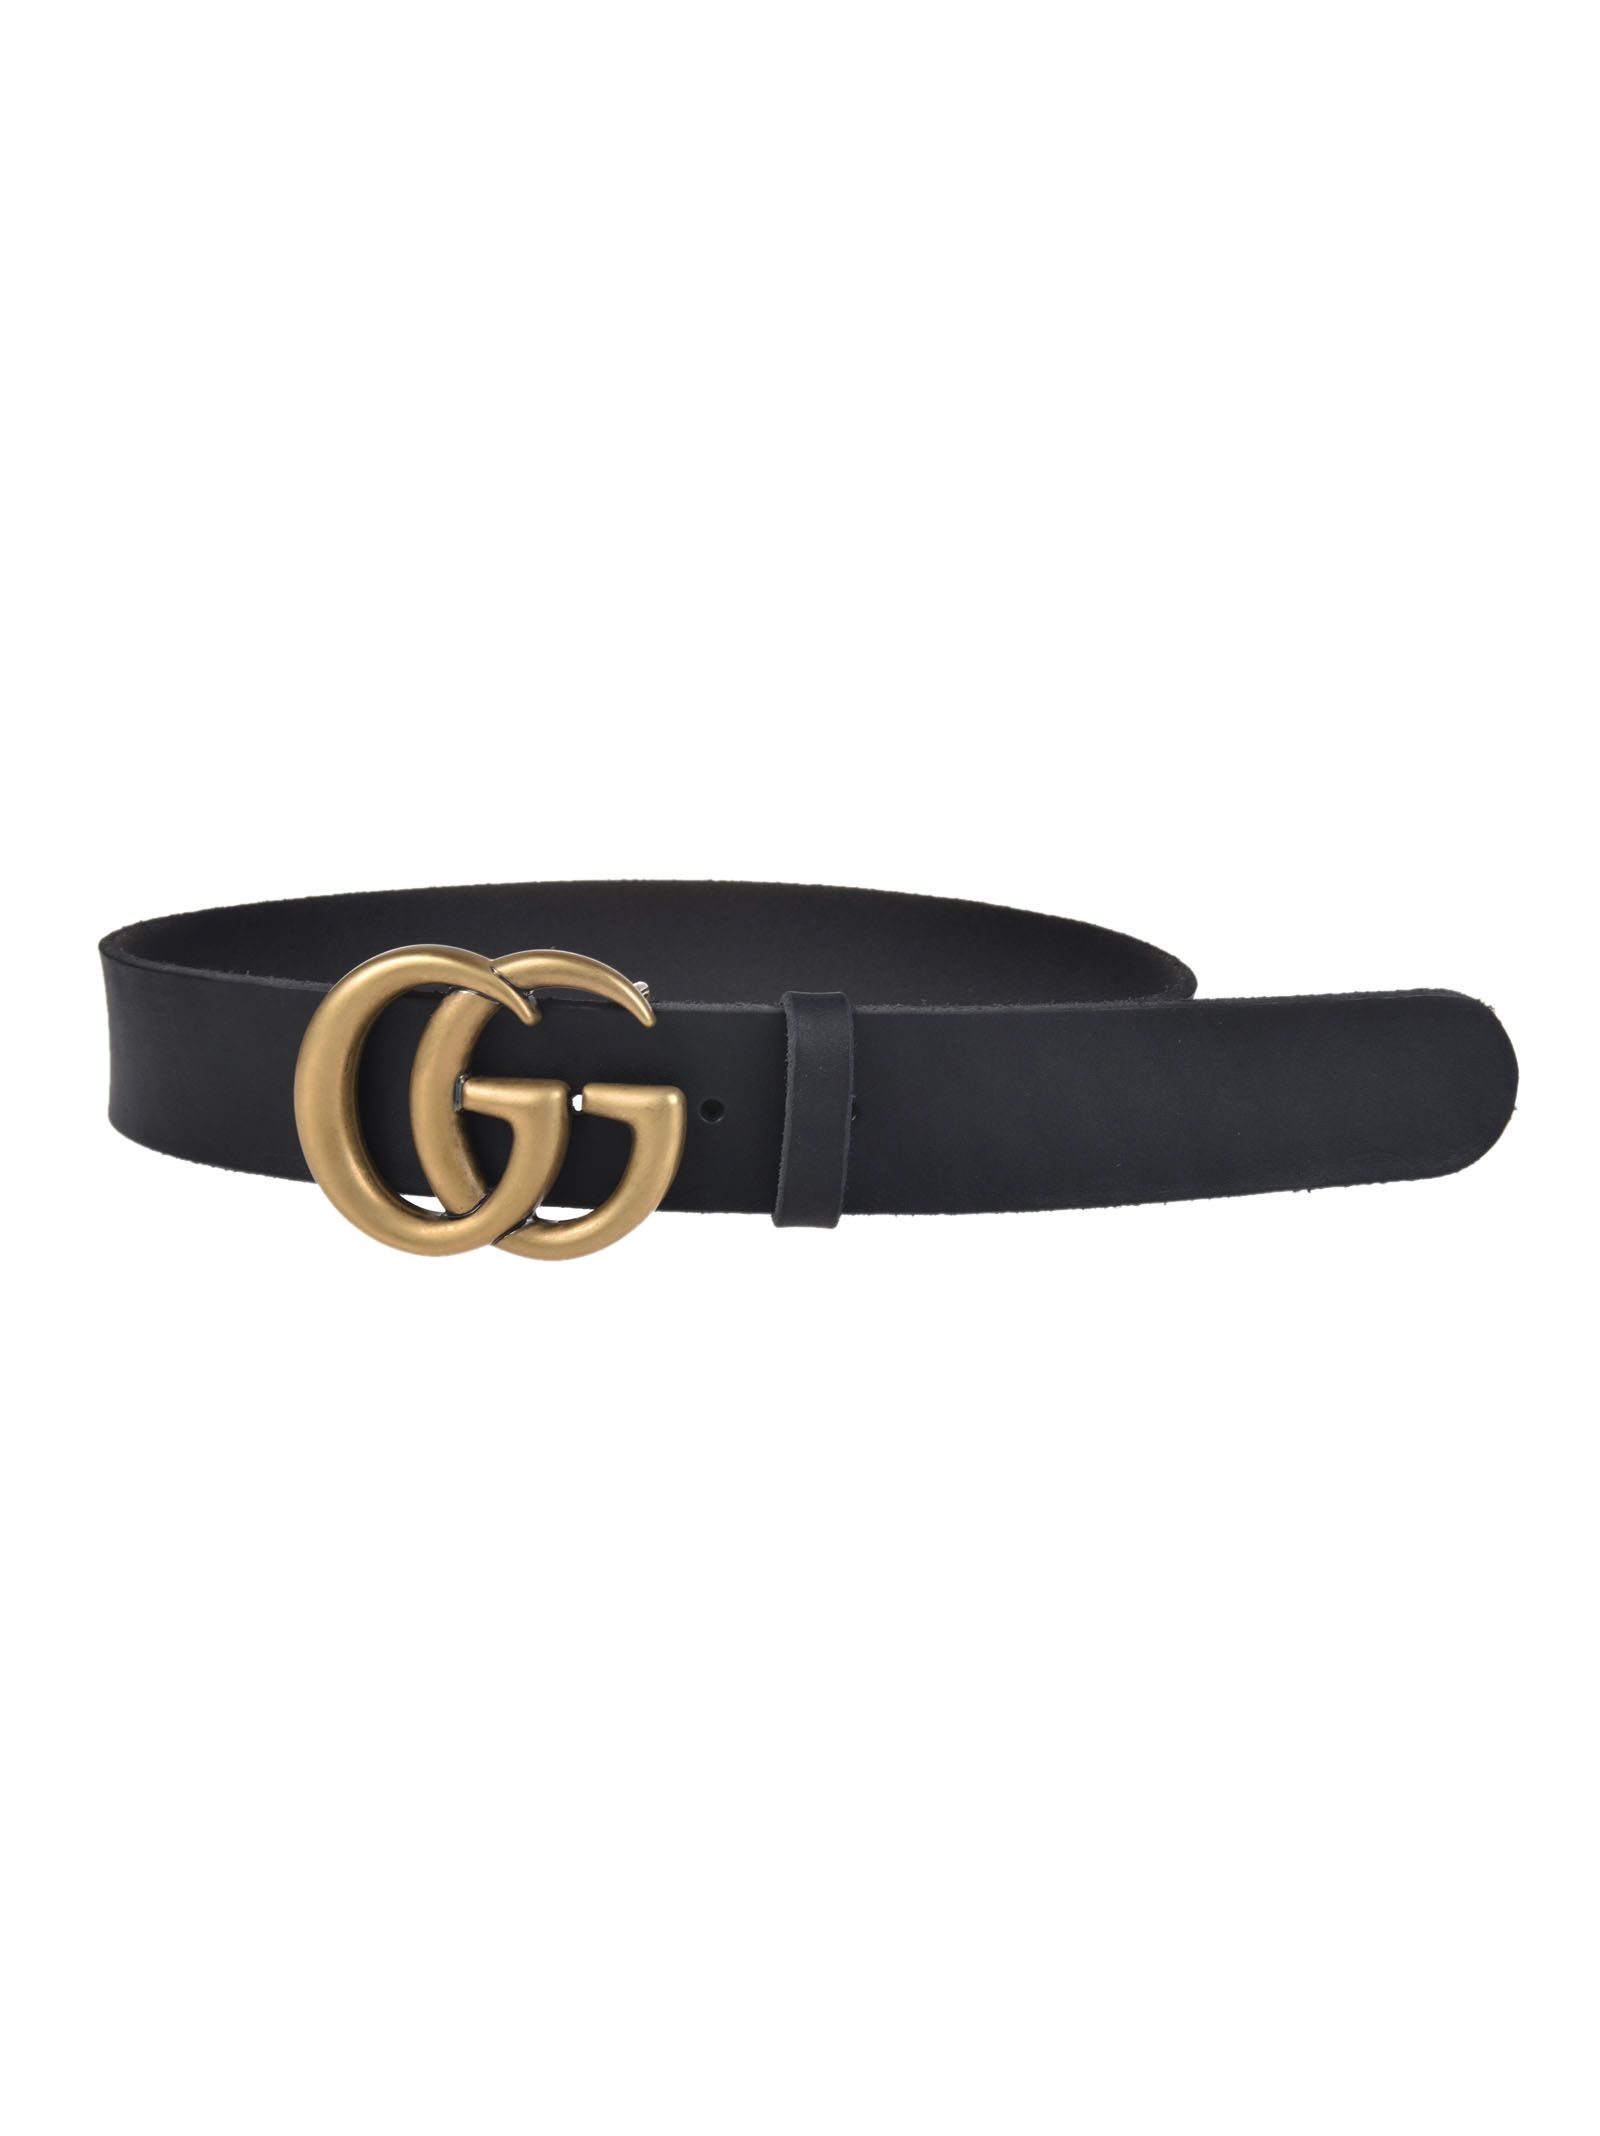 Black And Gold Gucci Belt Womens | Paul Smith